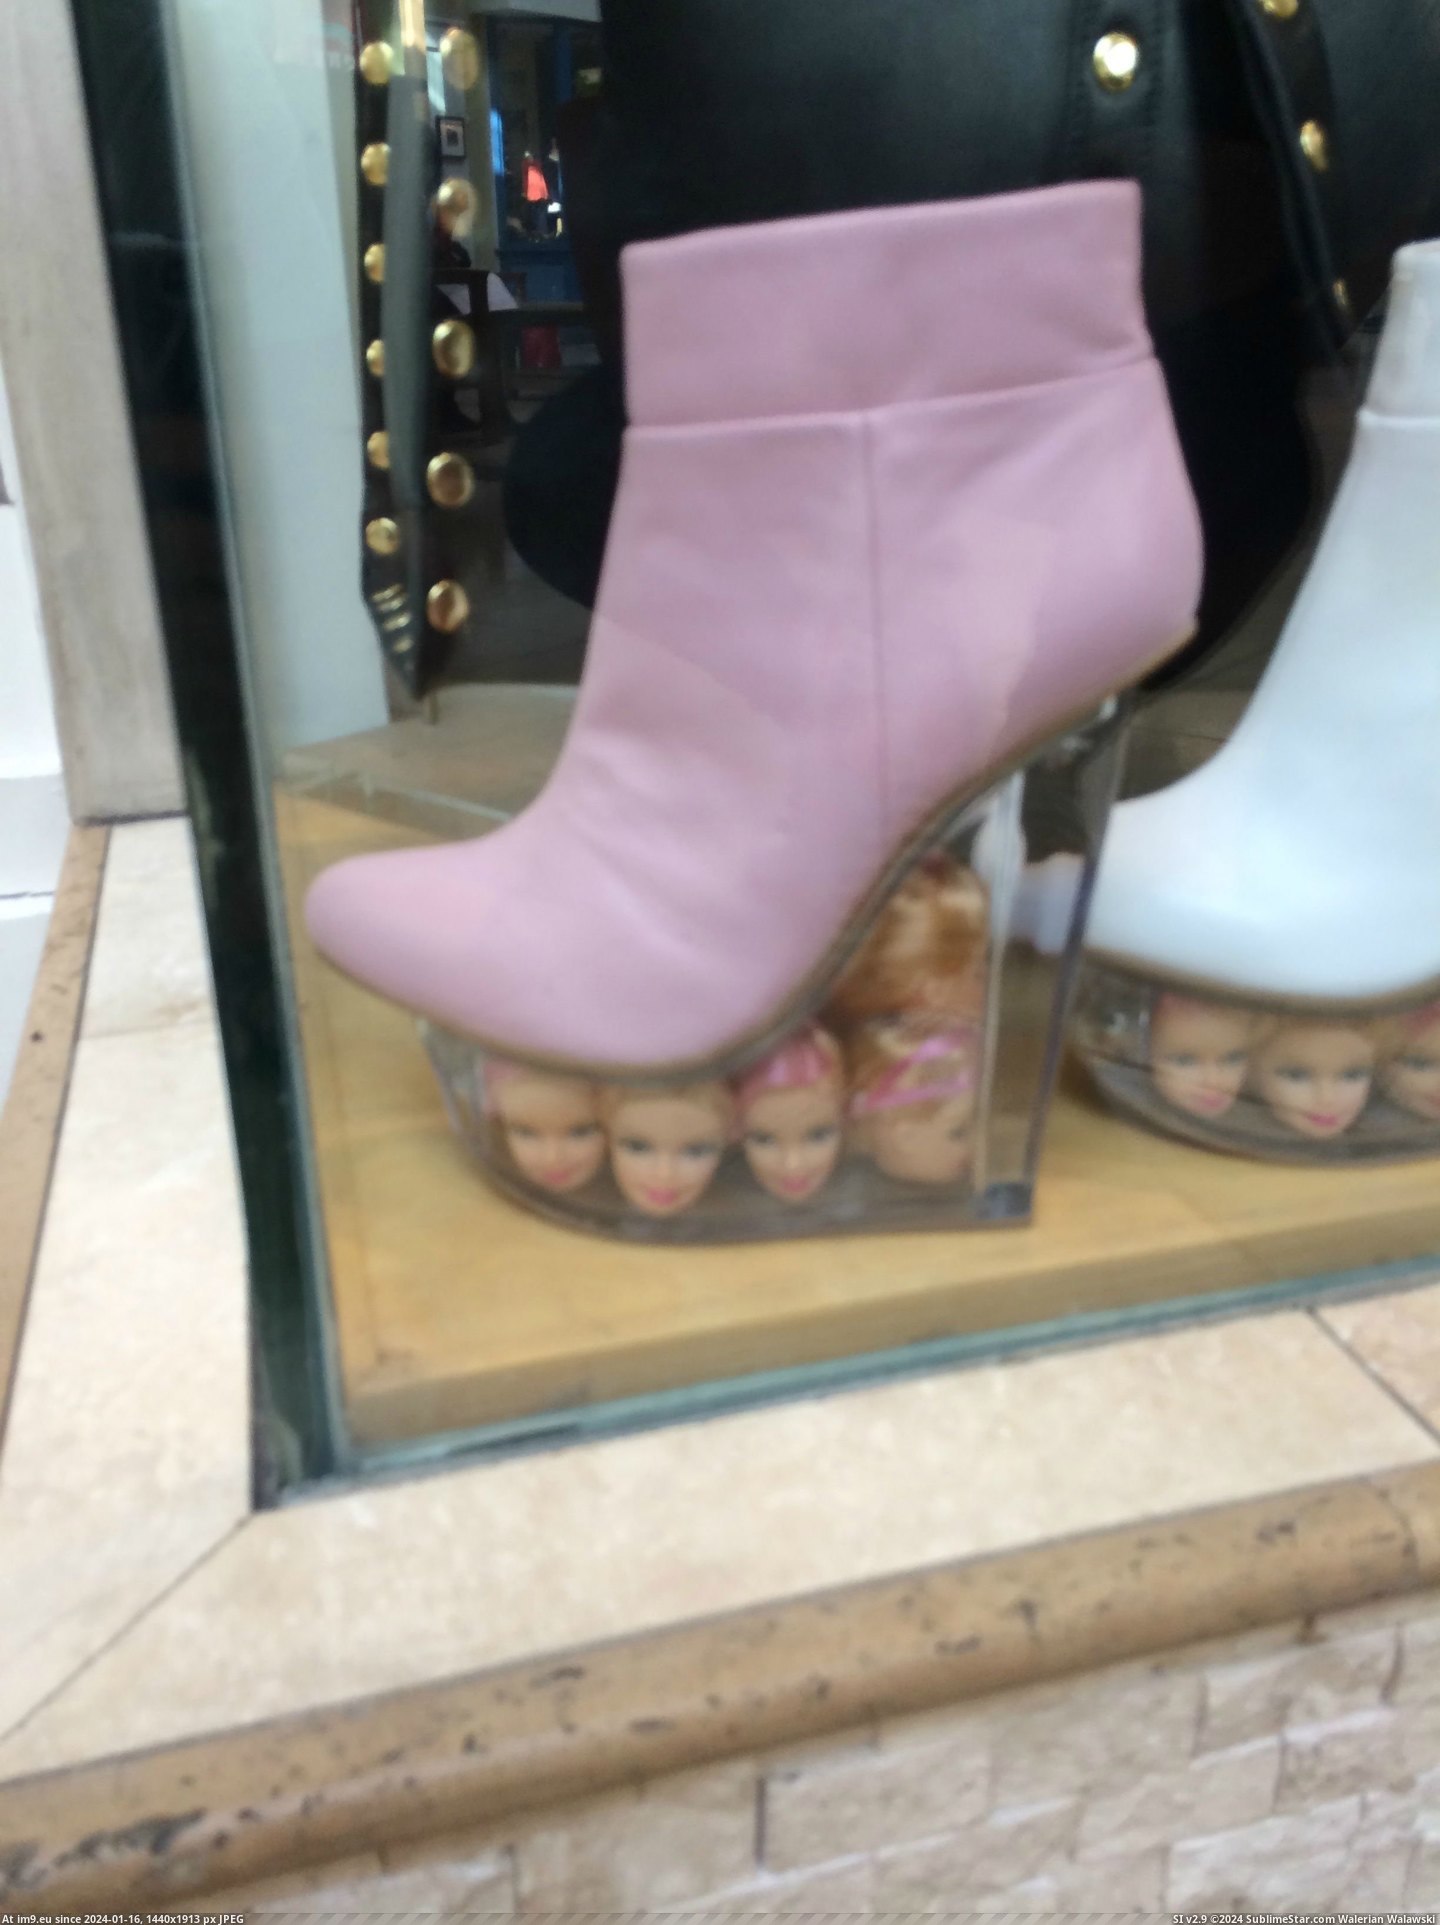 #Wtf #Local #Clever #Heads #Barbie #Mall #Shoe [Wtf] Couldn't even think of a clever title so here is a shoe with barbie heads in it seen at my local mall. Pic. (Изображение из альбом My r/WTF favs))